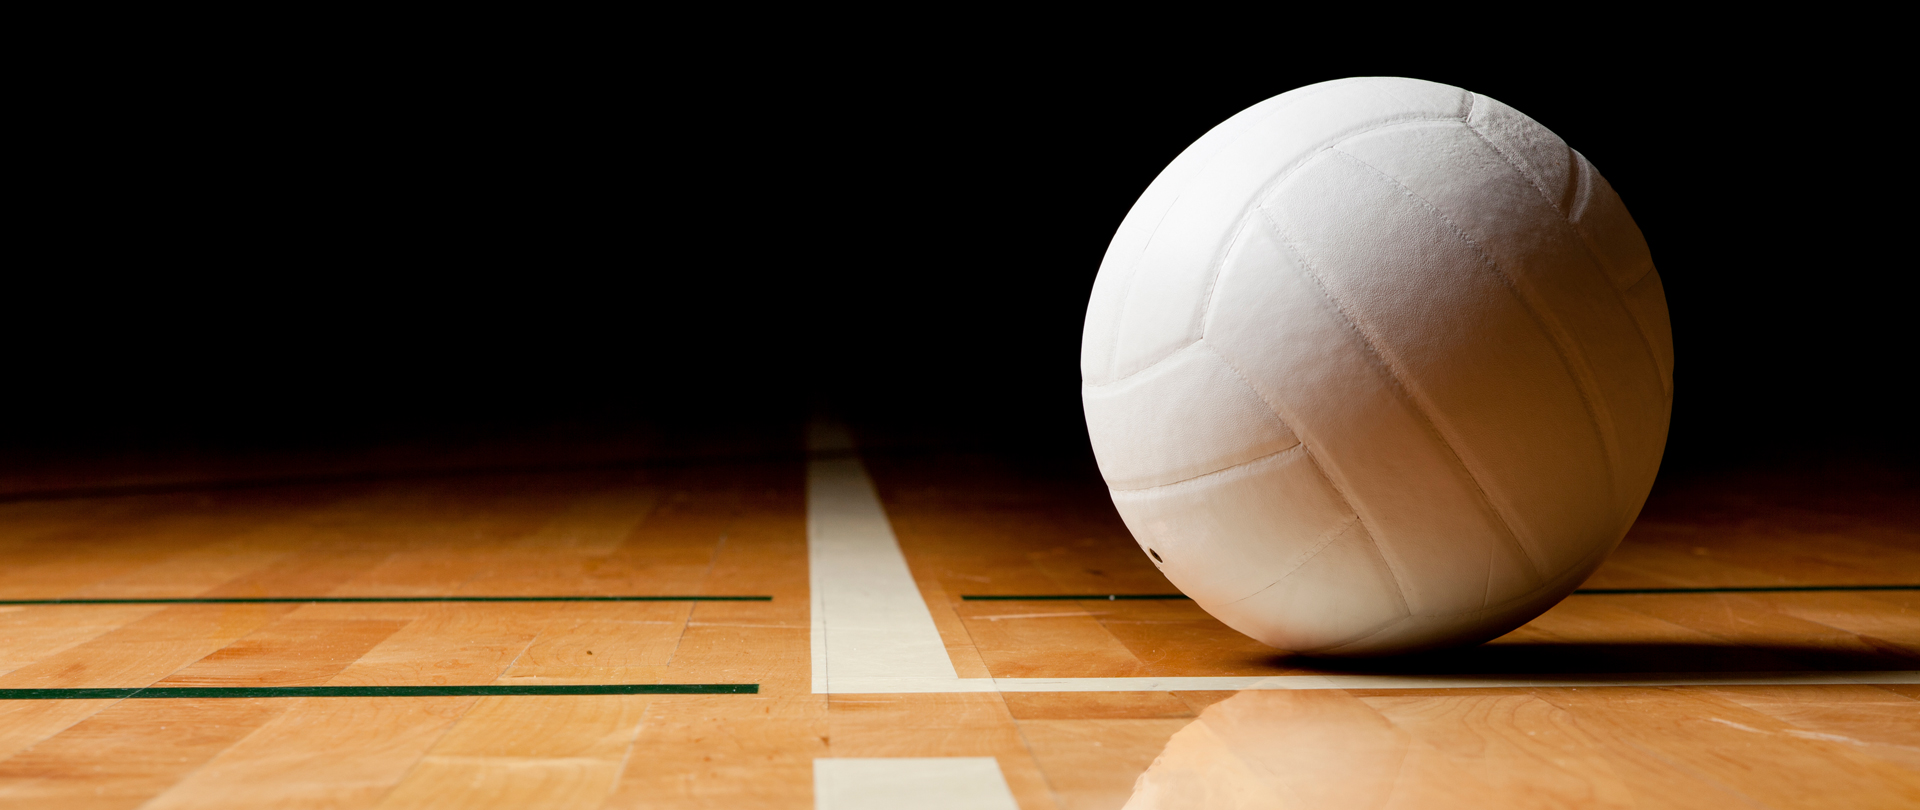 Adult Coed Volleyball
September – October 2022
